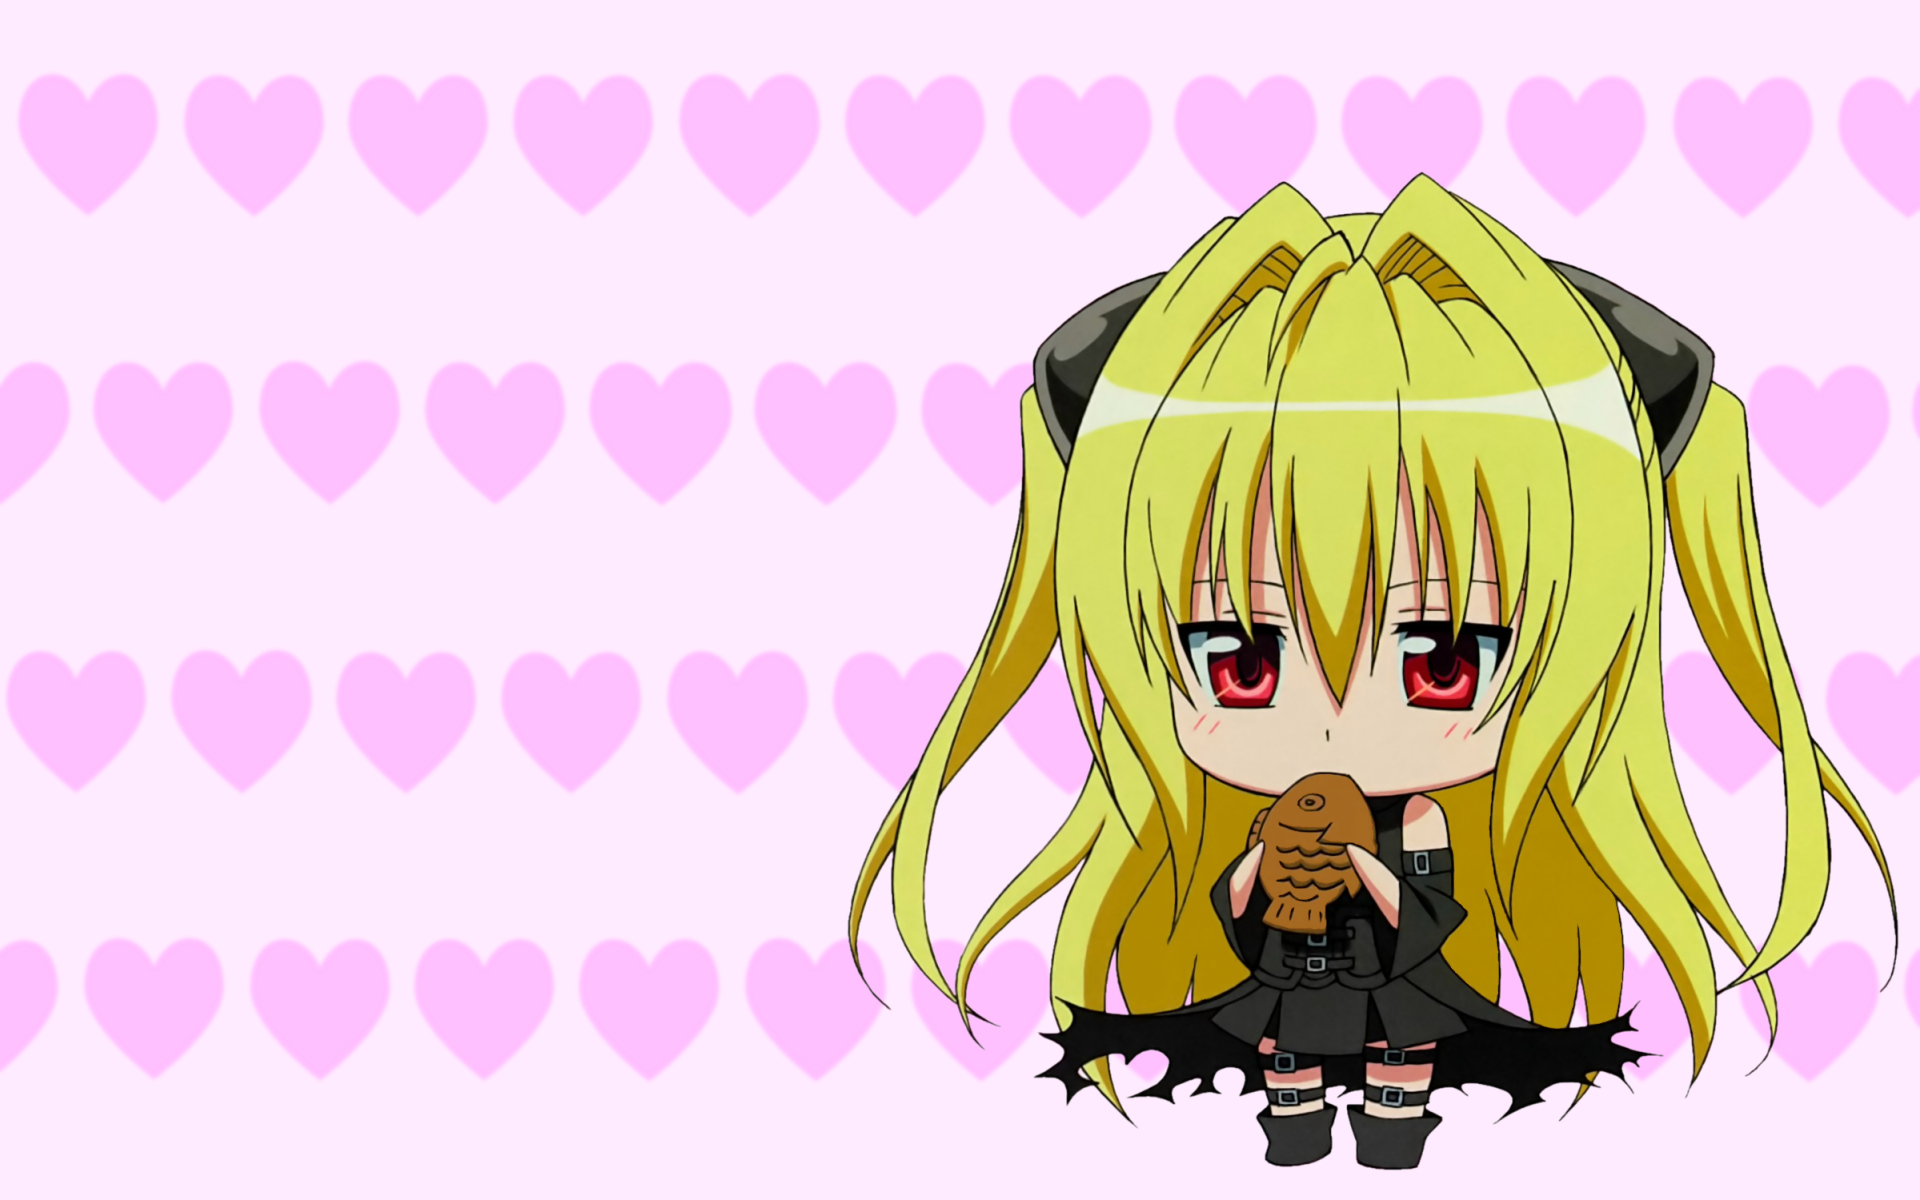 Golden Darkness, a chibi character from Anime To Love-Ru, in a desktop wallpaper.